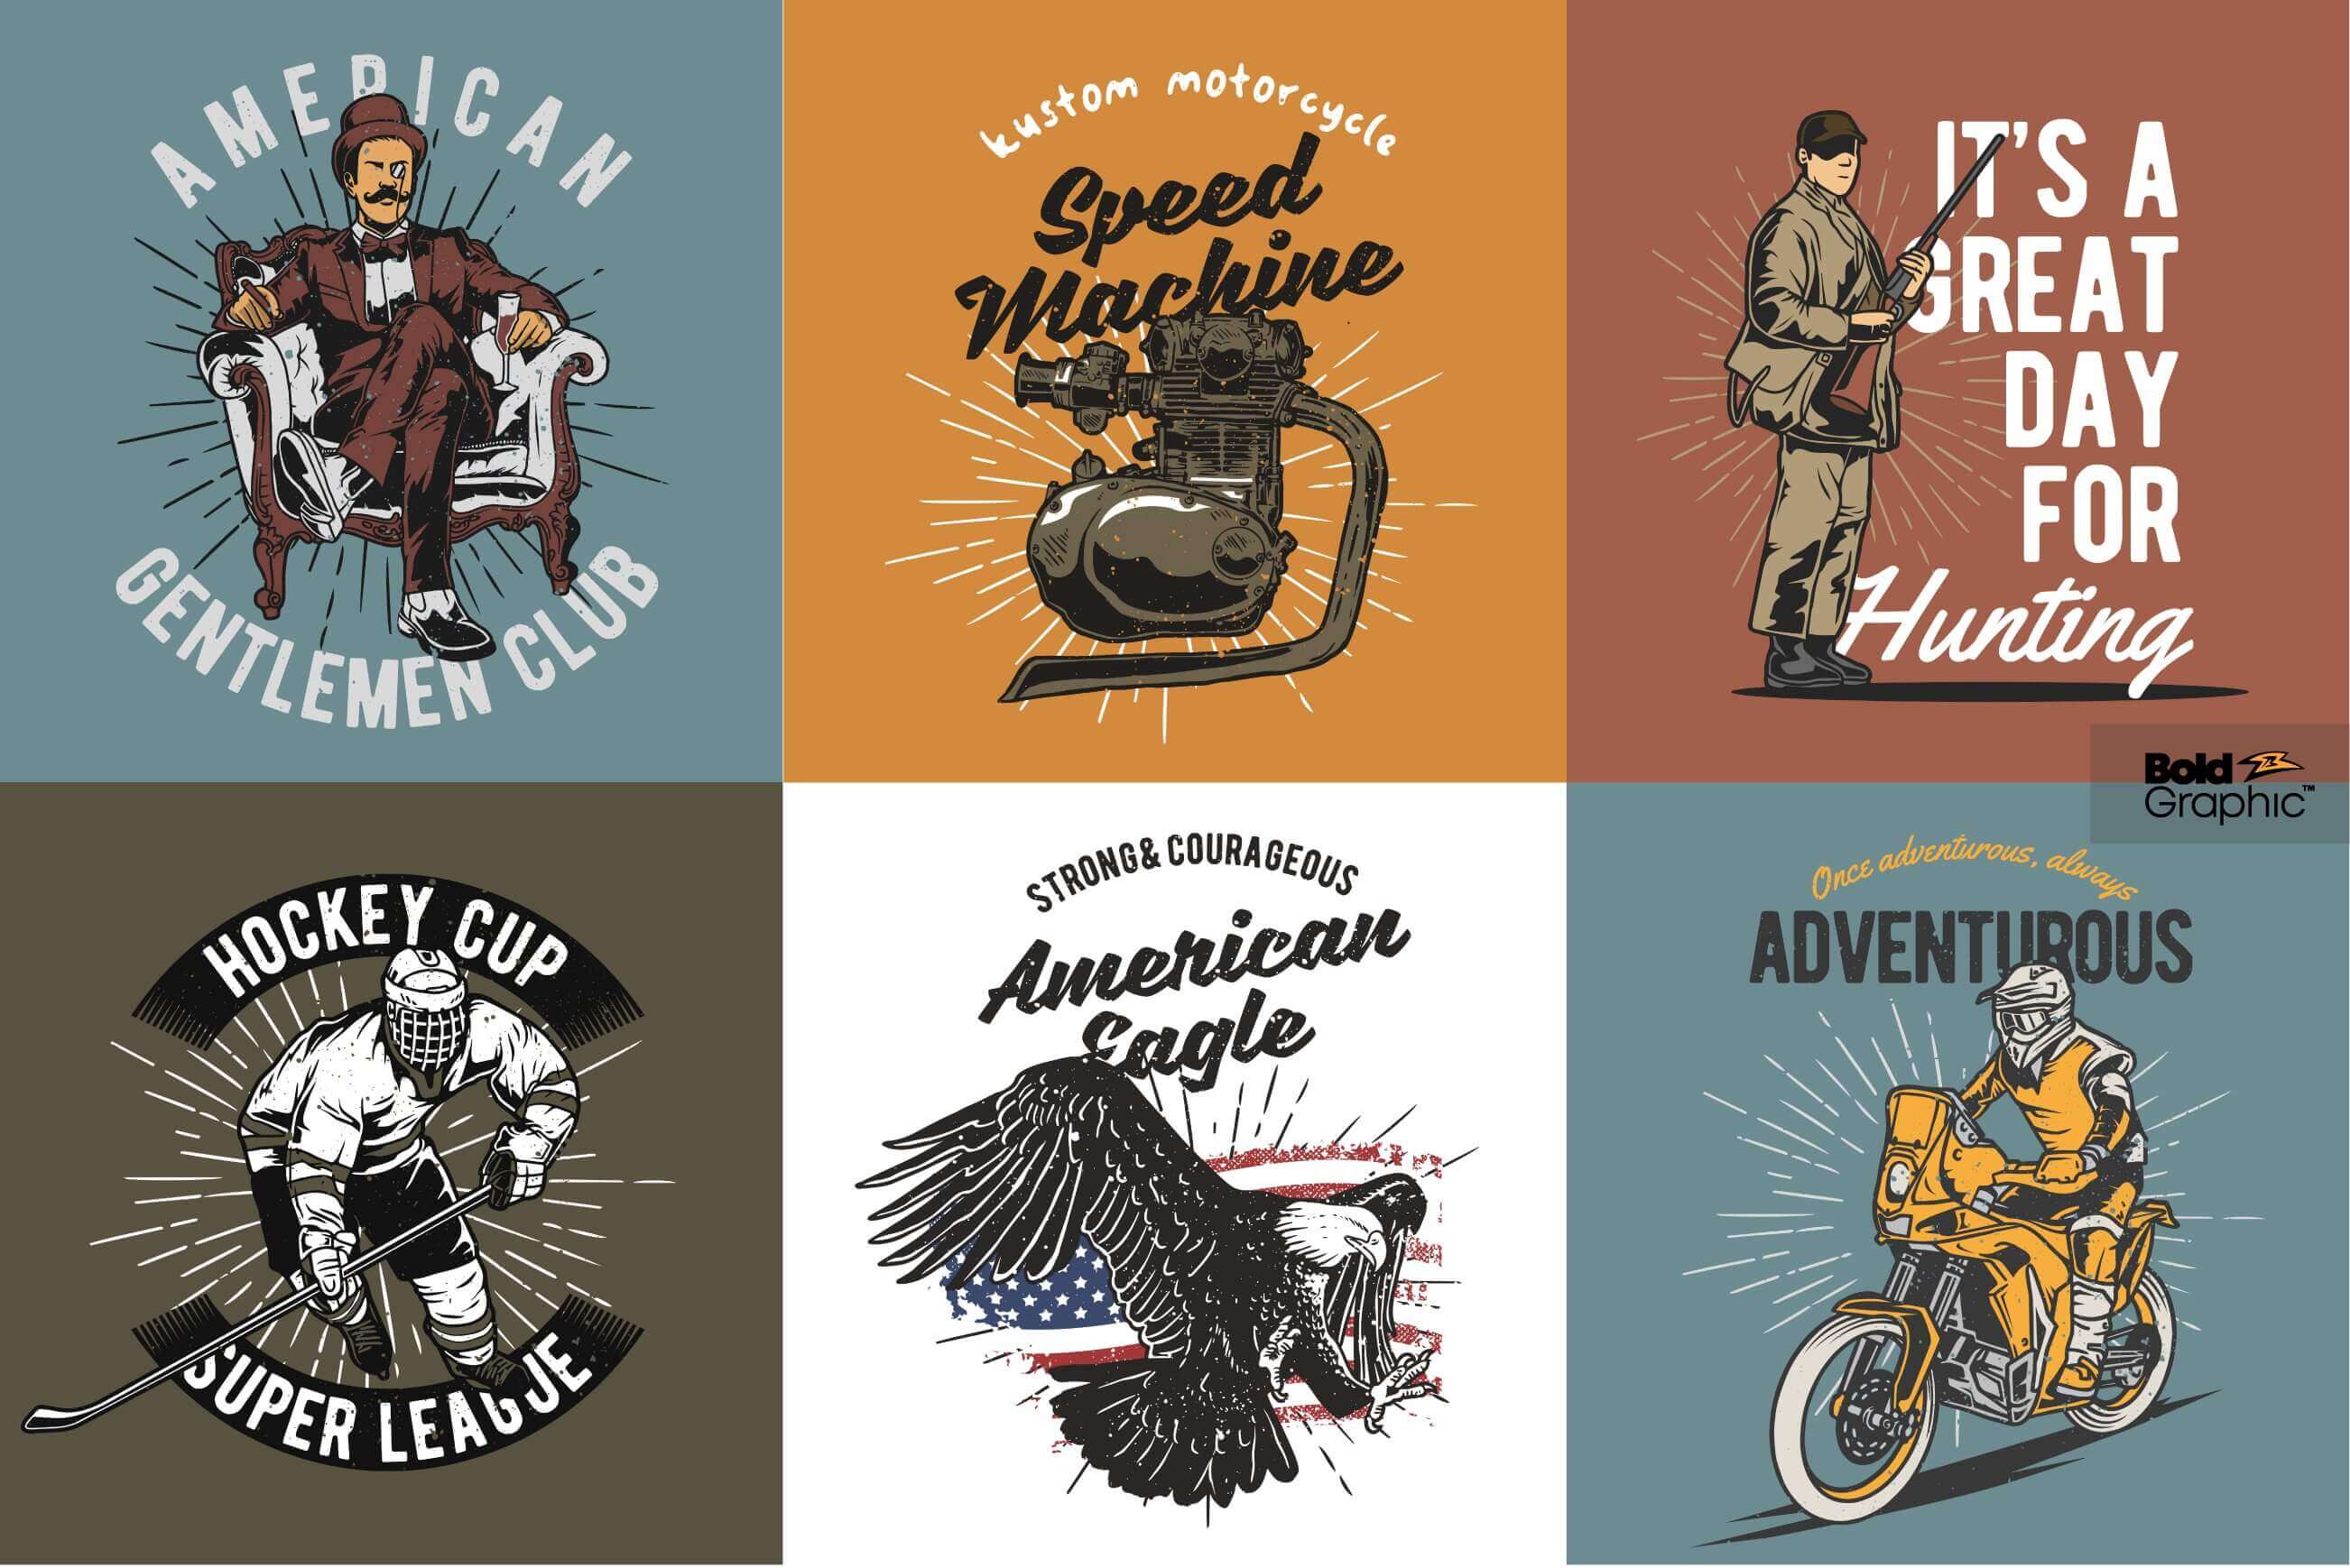 Inscriptions on prints: American gentlemen club, Custom motorcycle Speed Machine, It's a great day for Hunting.